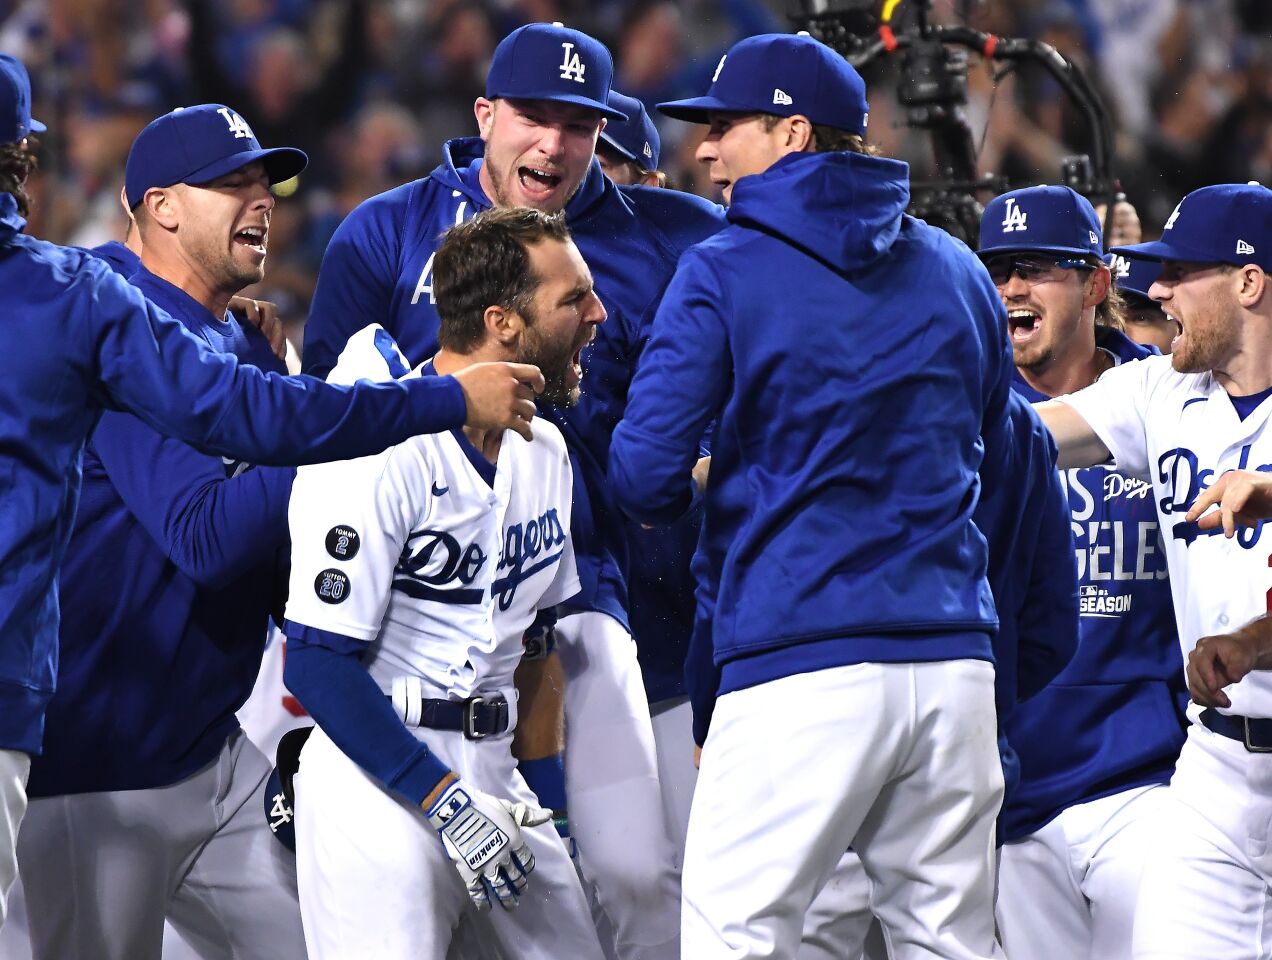 Dodgers left fielder Chris Taylor celebrates with teammates after hitting the game-winning two-run home run